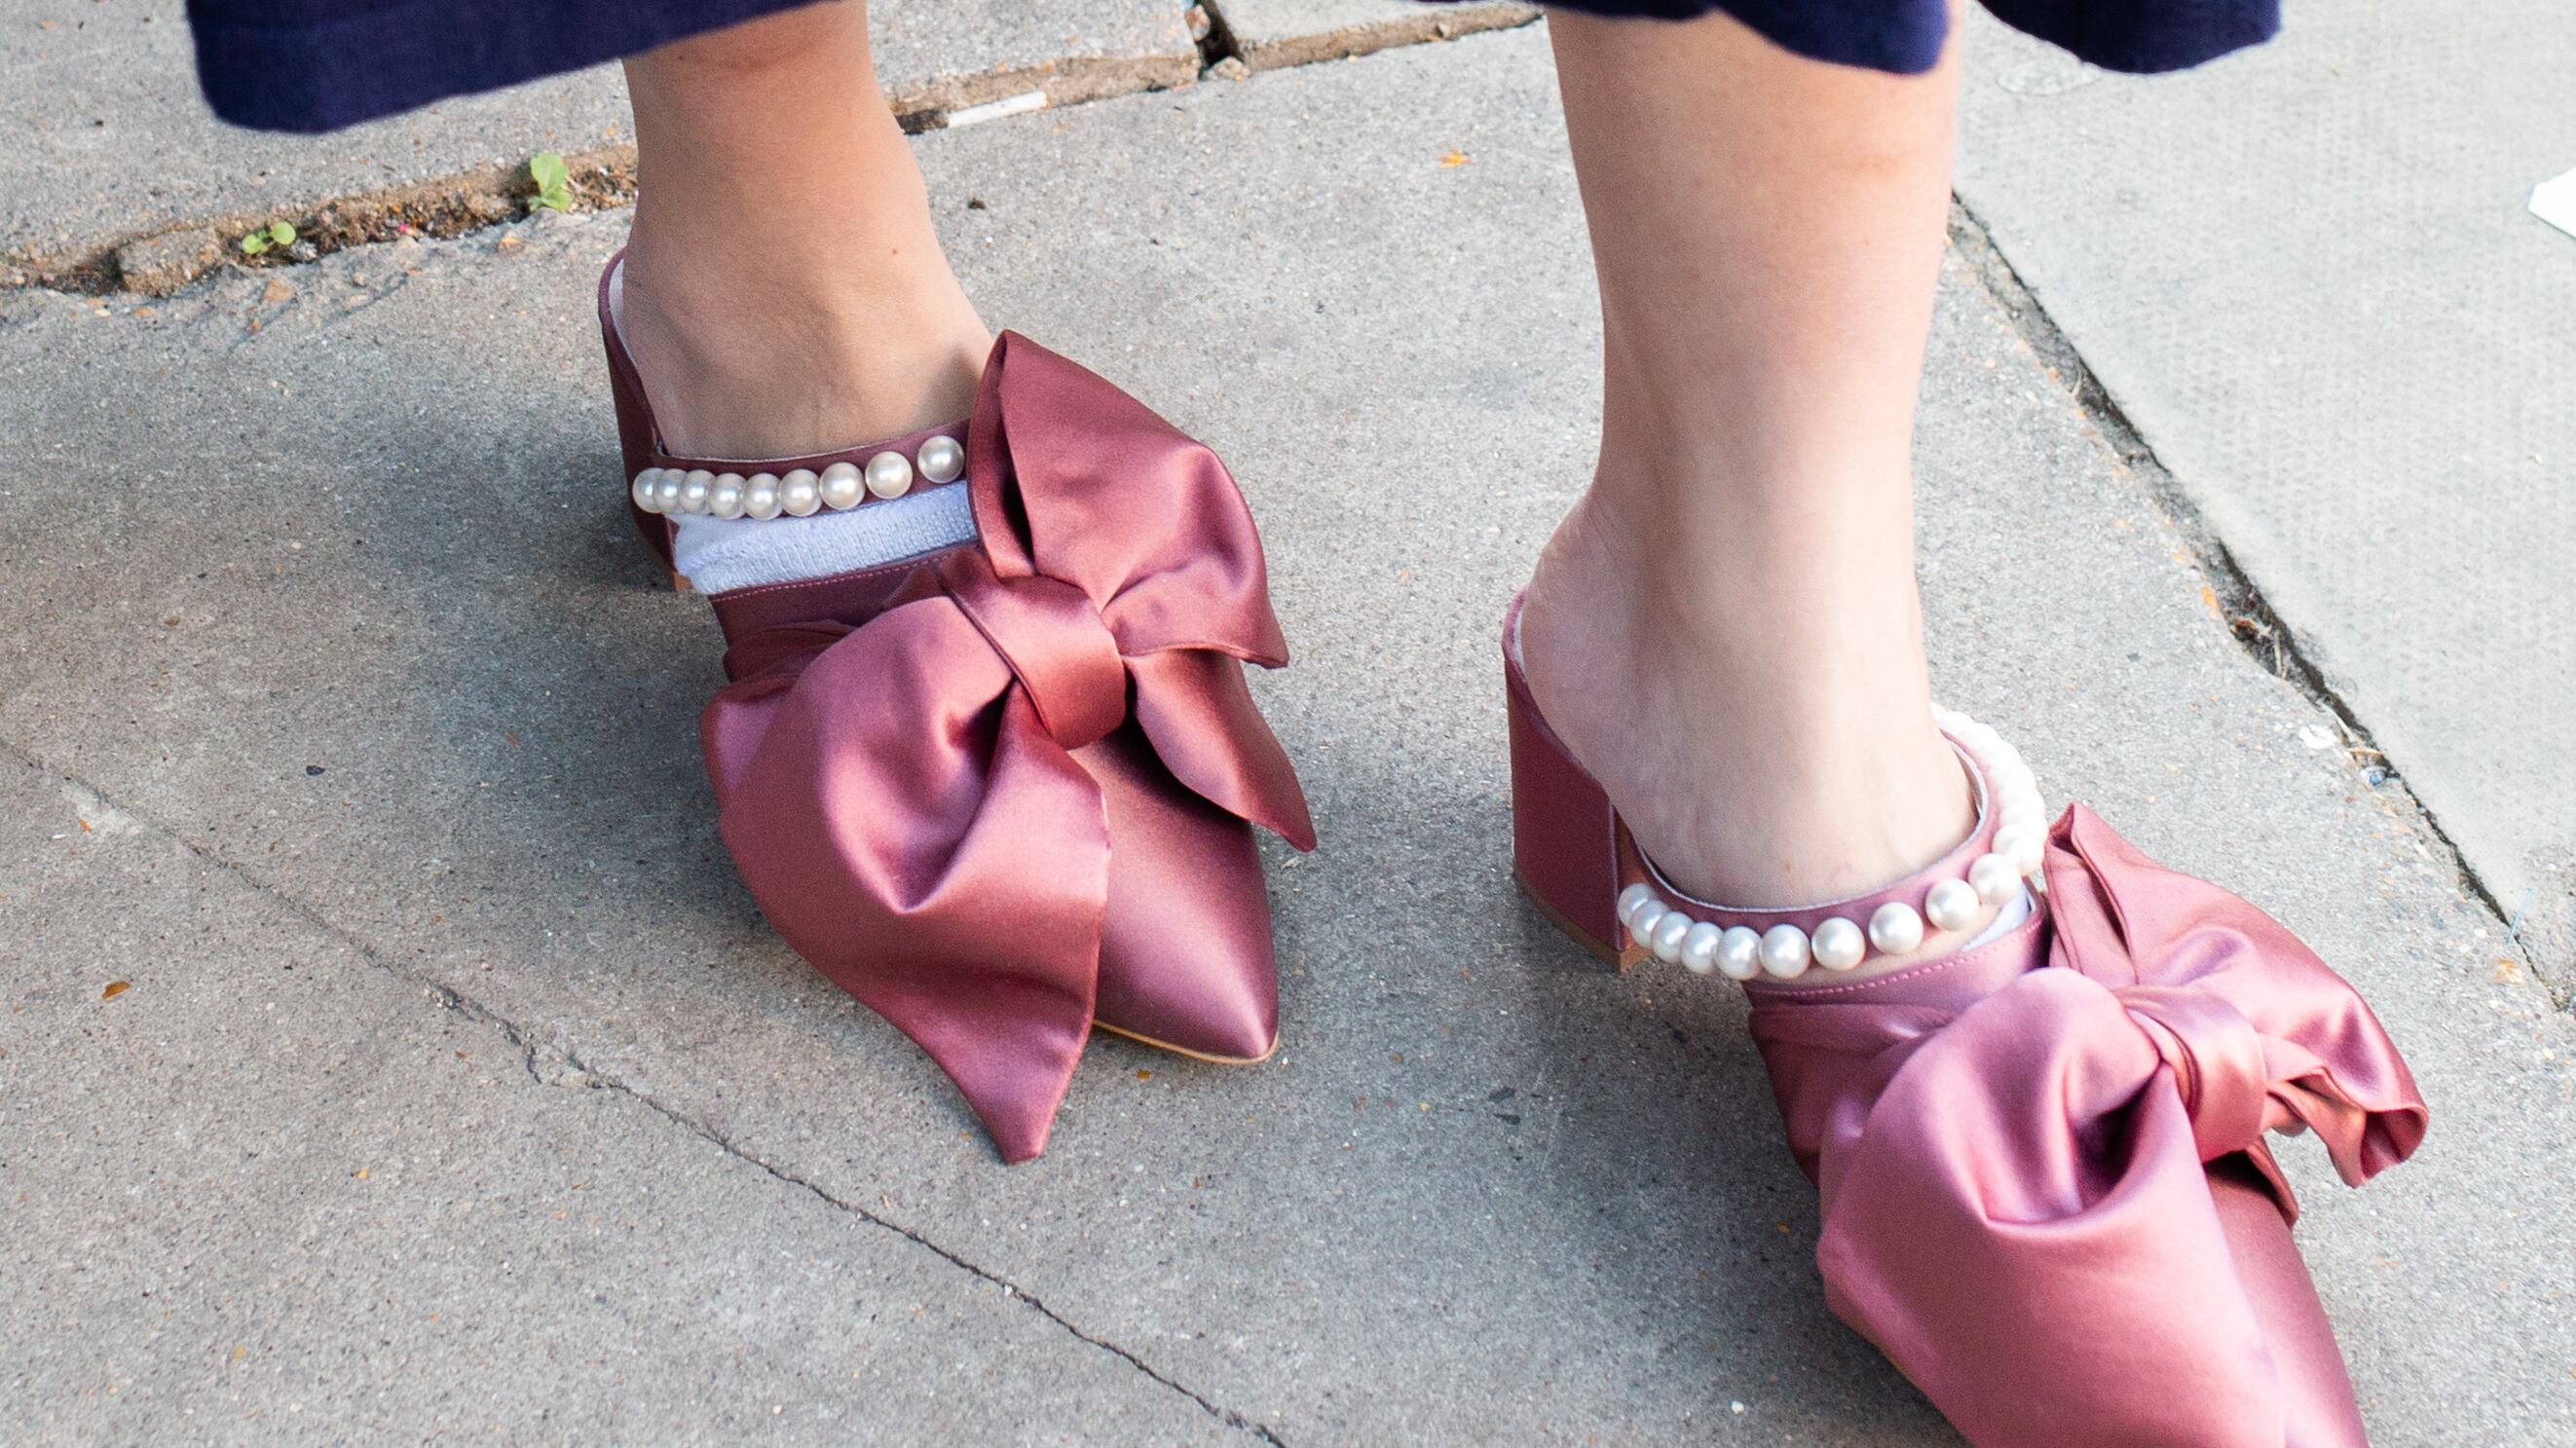 Jazzy pumps are the go-to flat shoe for summer